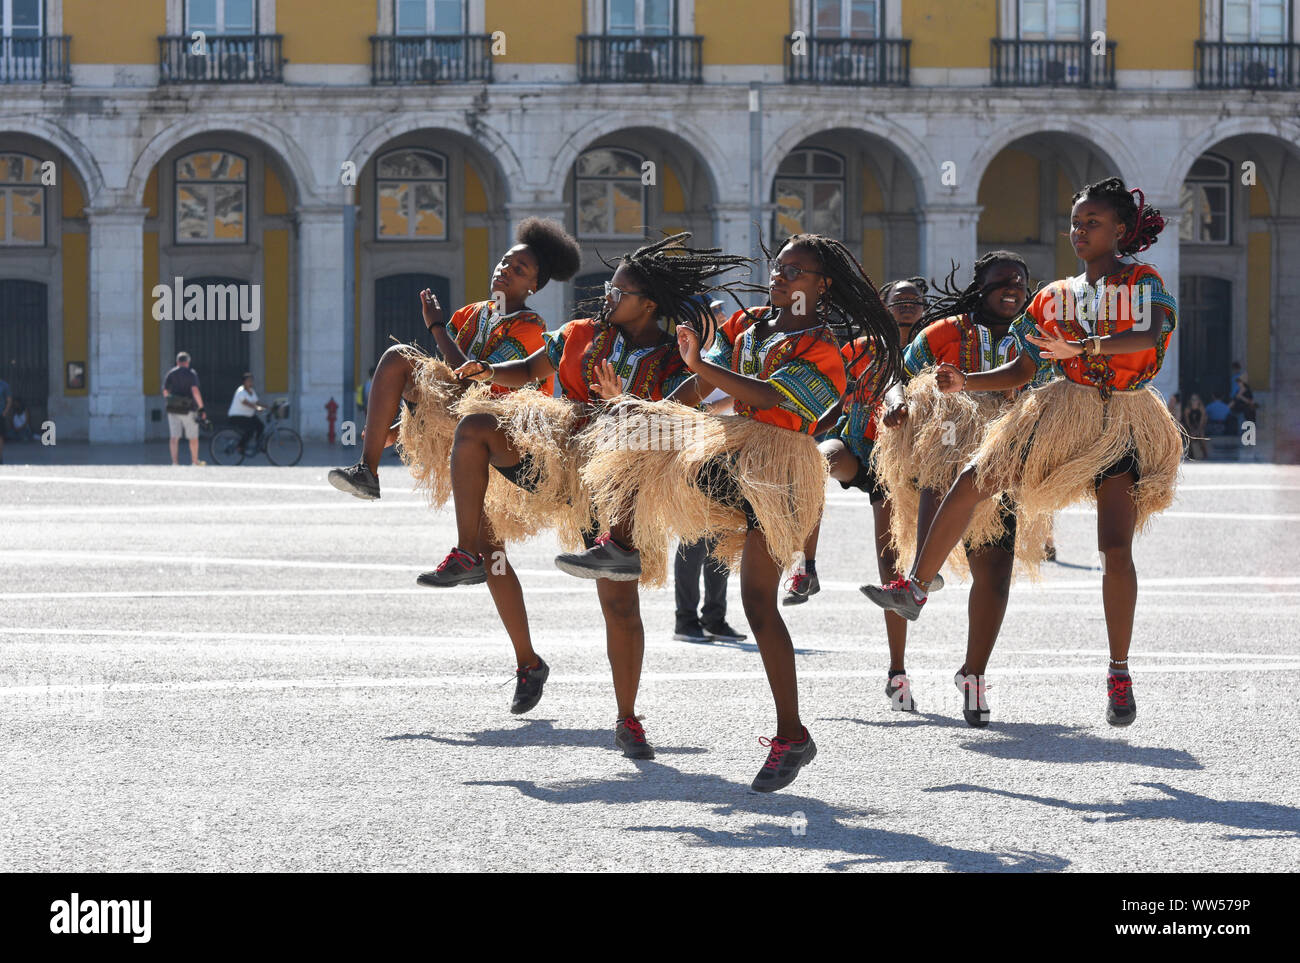 Six Young Women energetically practising African style dancing in Lisbon's Praça do Comércio Portugal Stock Photo